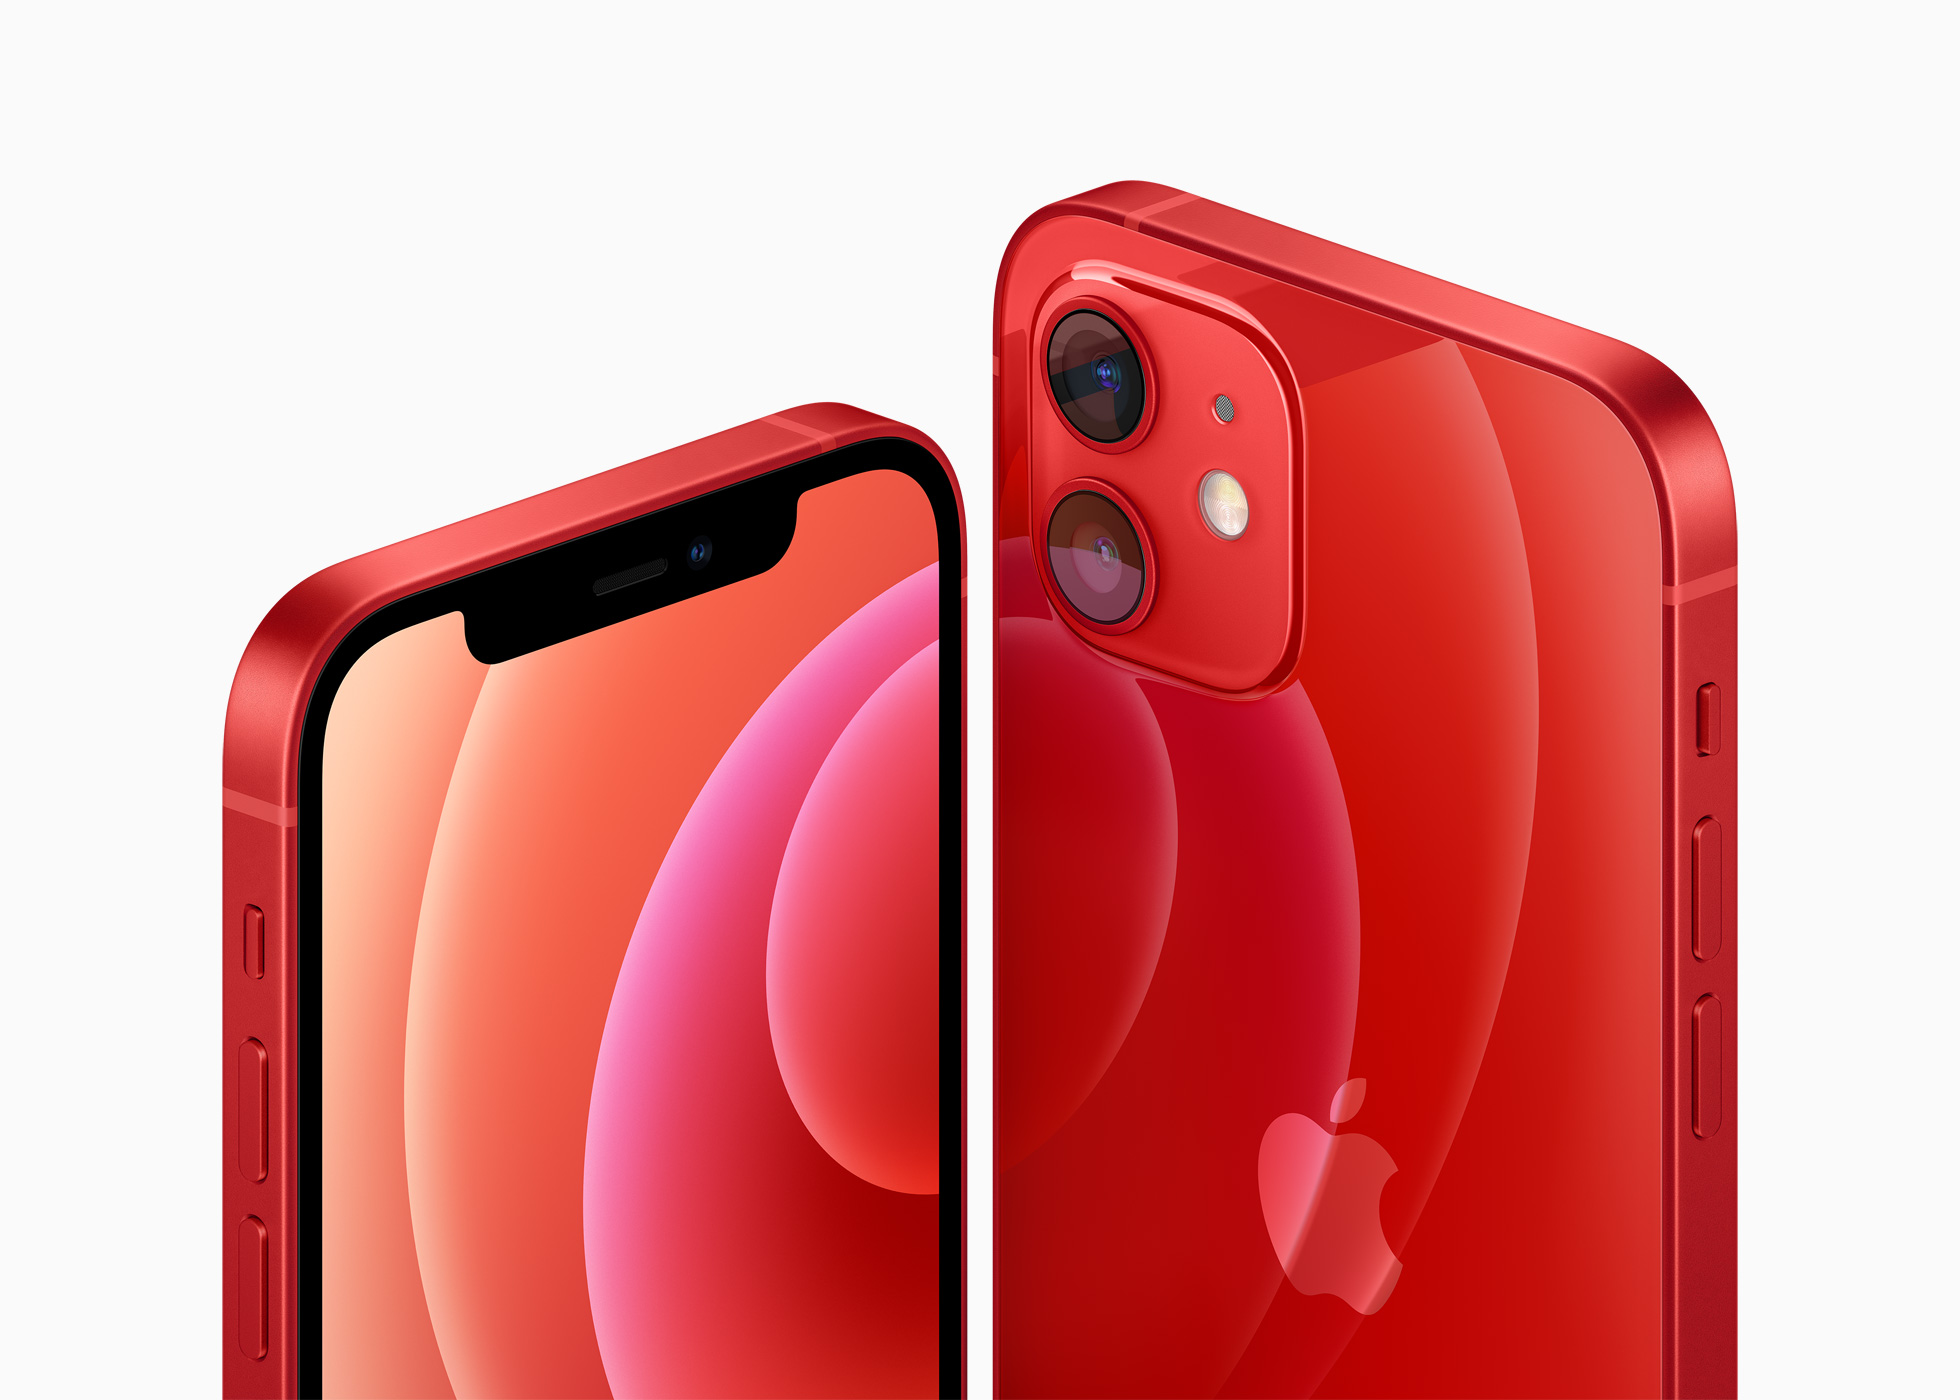 apple_iphone-12_color-red_10132020_big_c